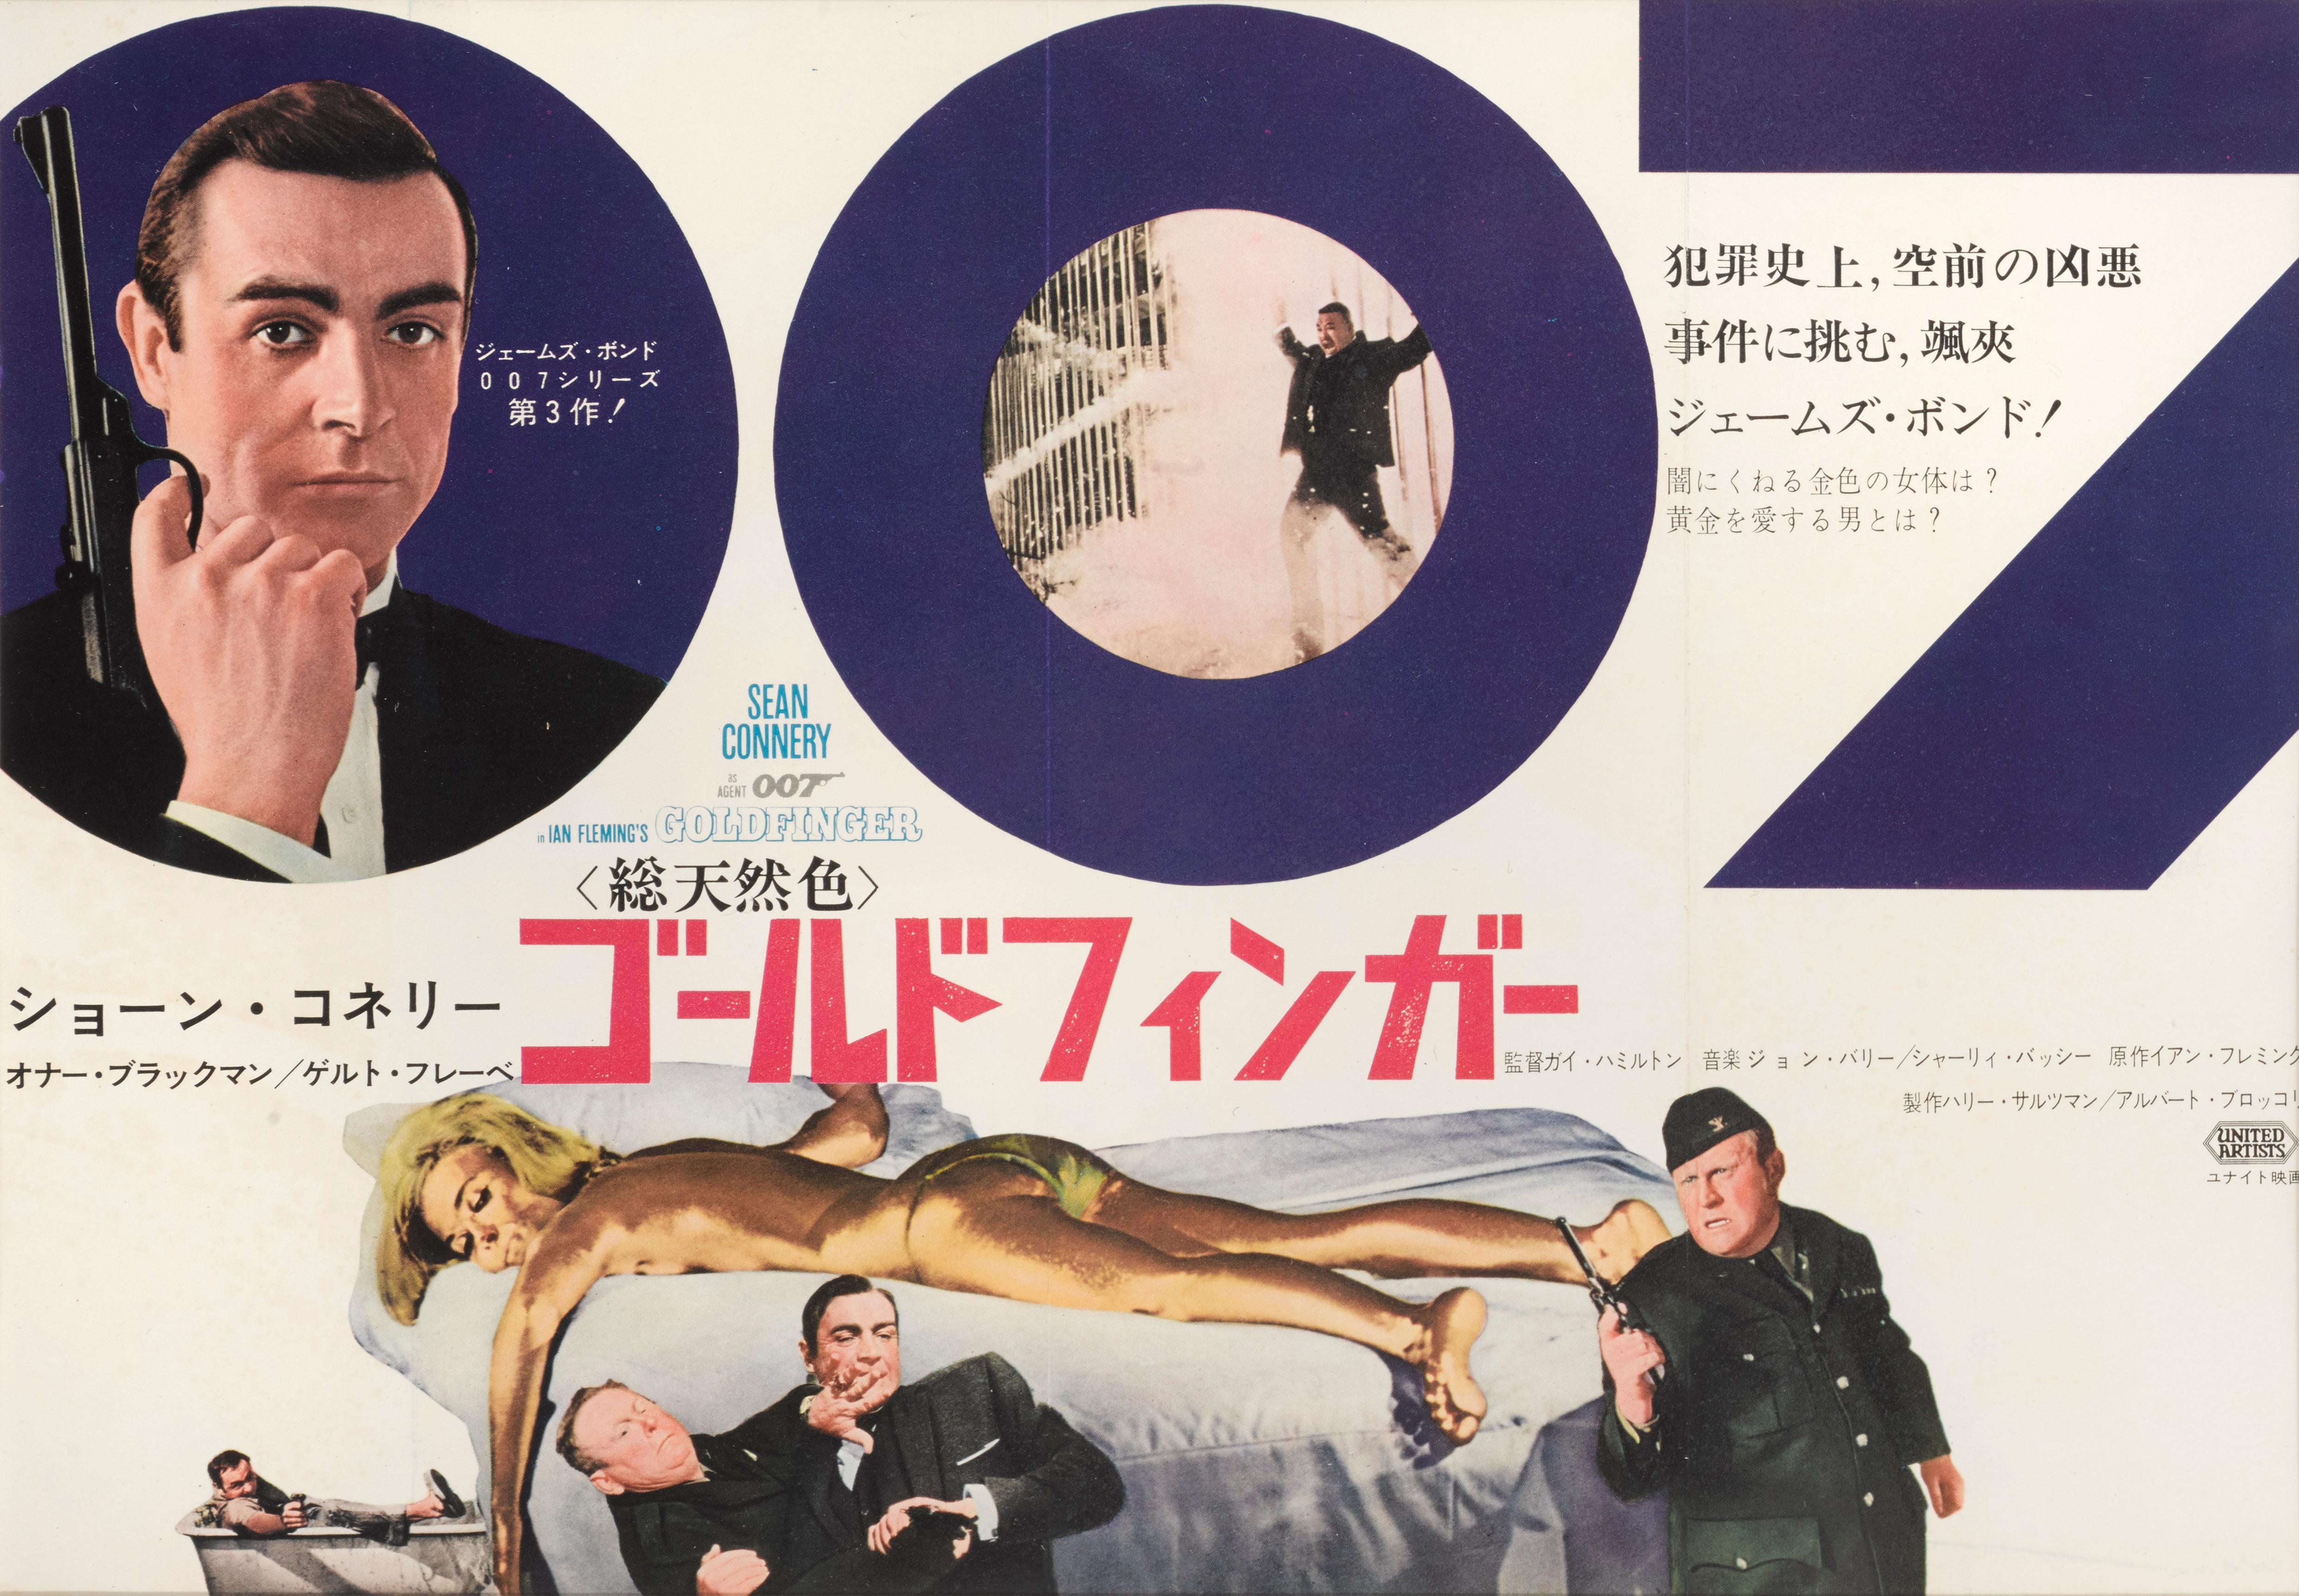 Original Japanese trade advertisement used for Goldfinger 1964. This was the third time that Sean Connery would play James Bond 007, and the first of four Bond films that Guy Hamilton would direct. It is a hugely popular film in the Bond series This